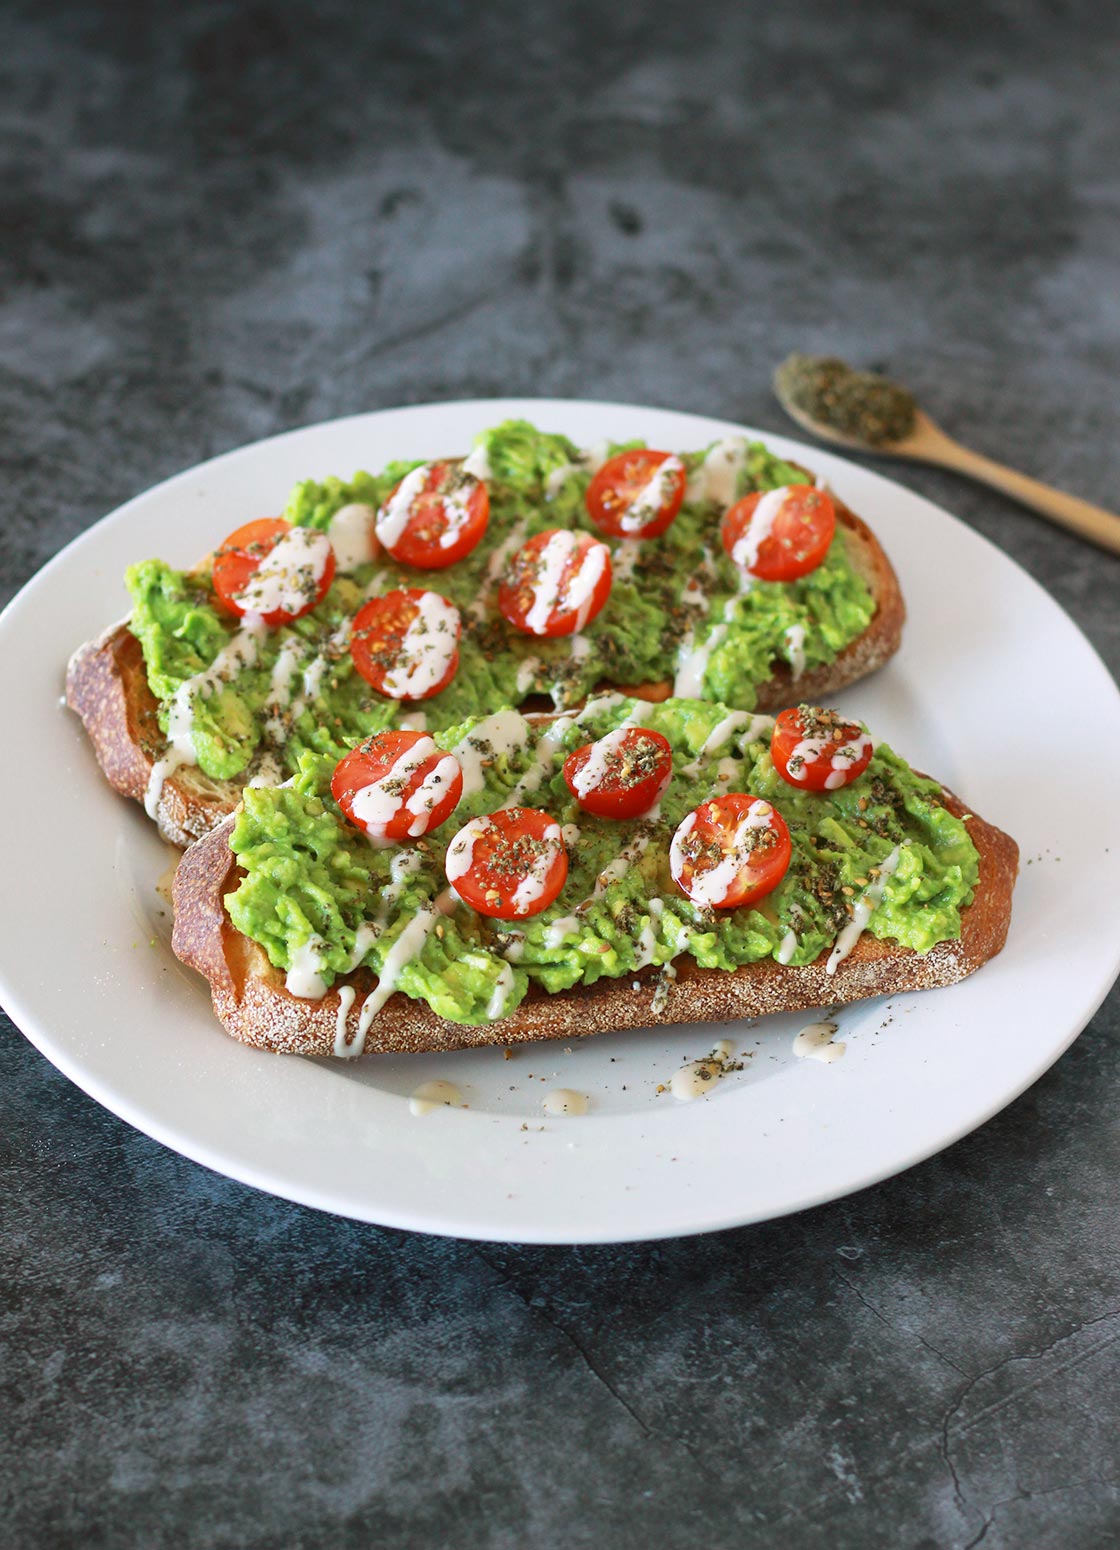 This zaatar avocado toast is a Mediterranean twist on your classic avocado toast, dressed with juicy cherry tomatoes and a creamy 3-ingredient tahini drizzle. This vegan recipe is a modern twist on the classic Middle Eastern breakfast staple of bread with zaatar and olive oil.